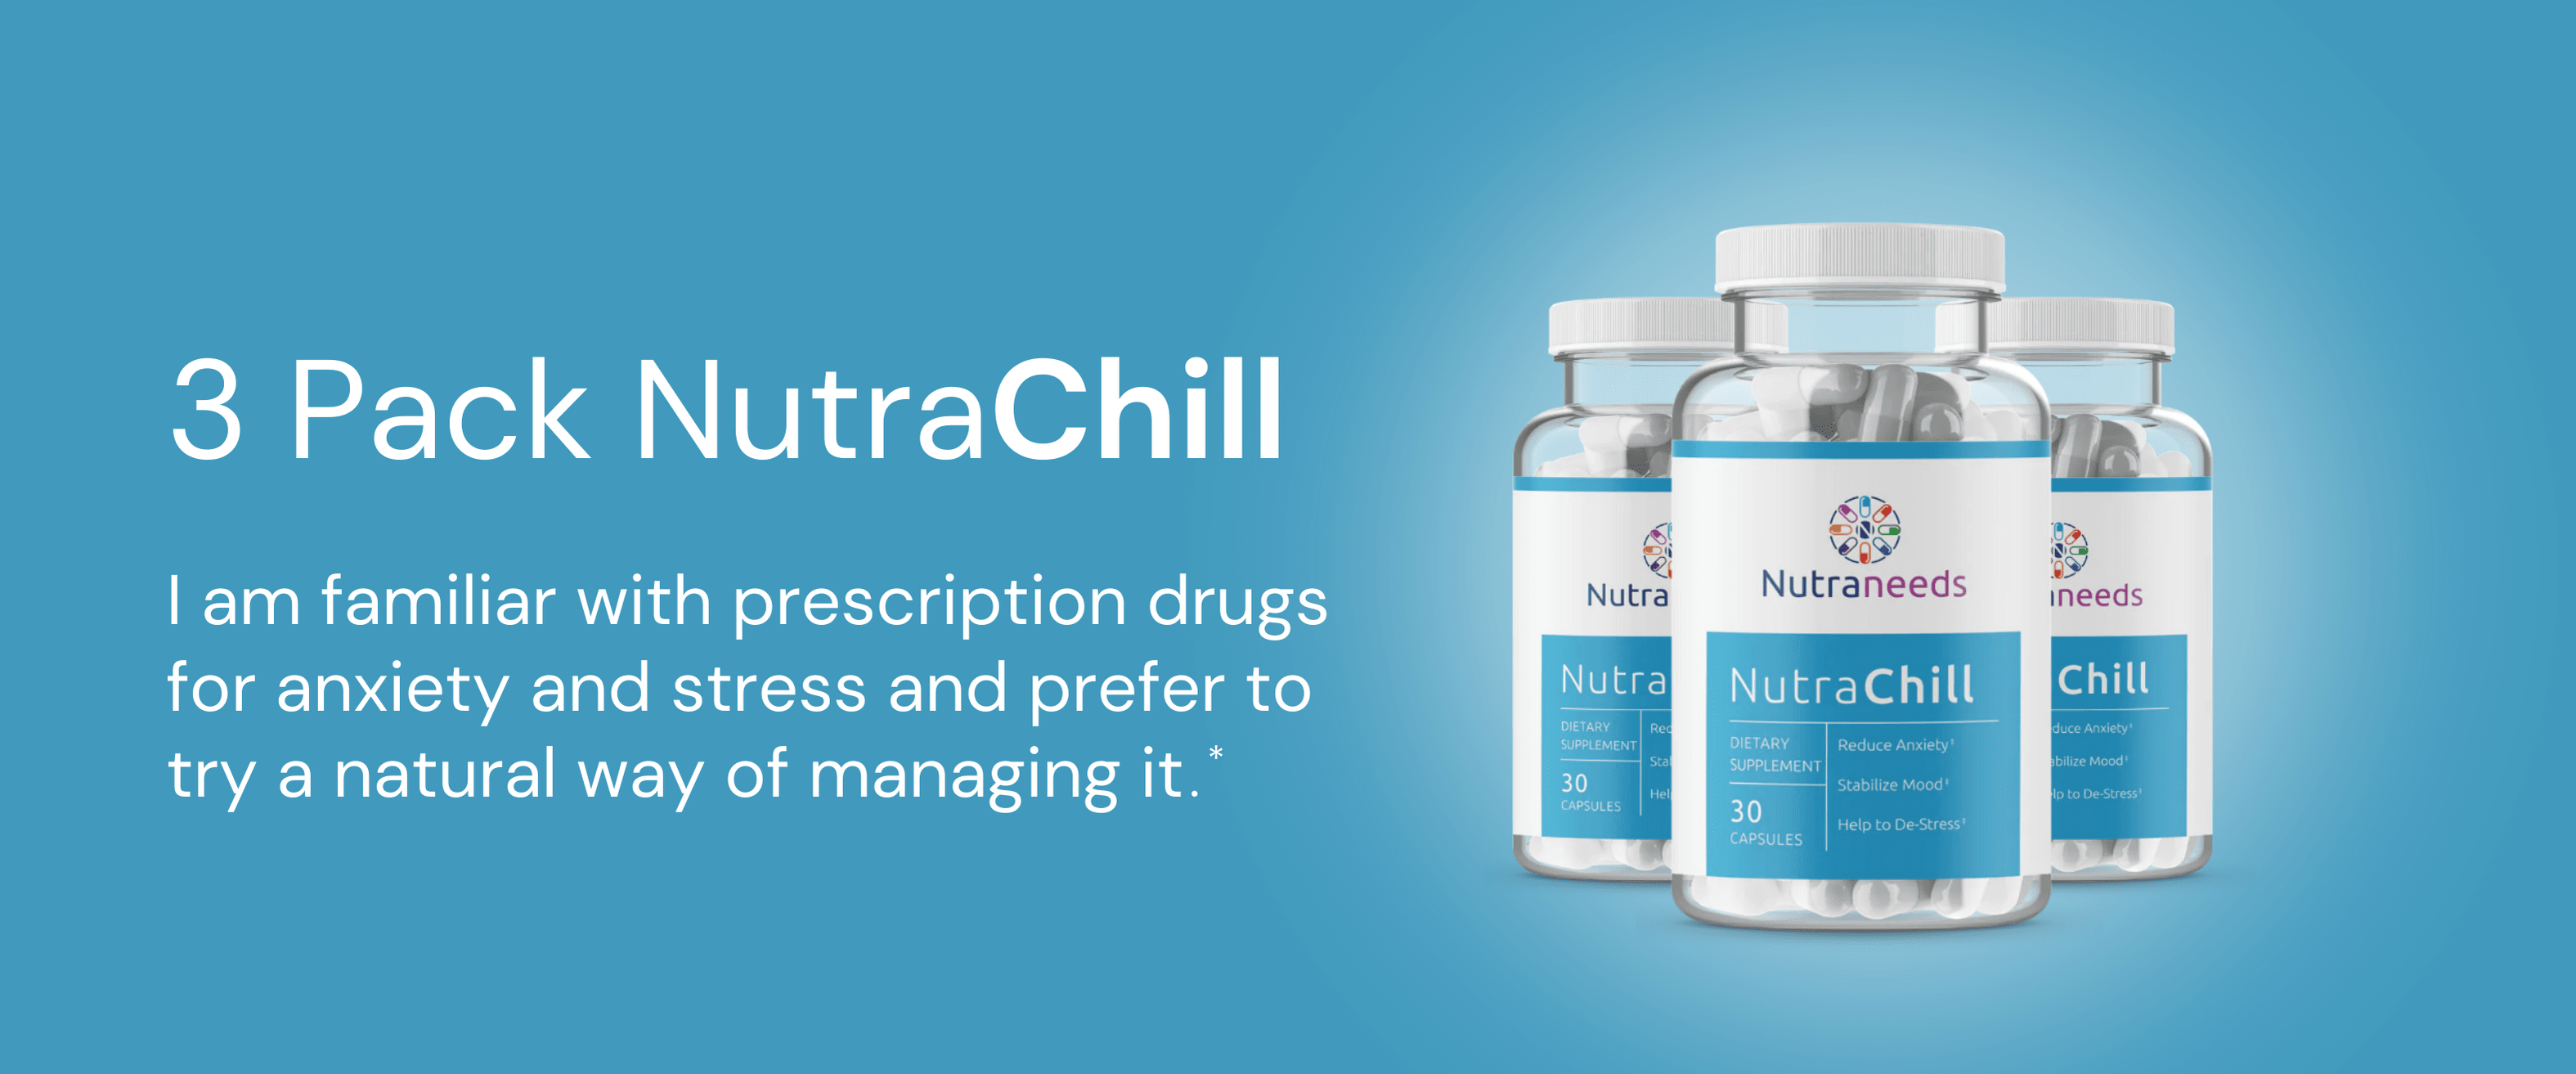 3 Pack of NutraChill Supplement for Anxiety and Stress